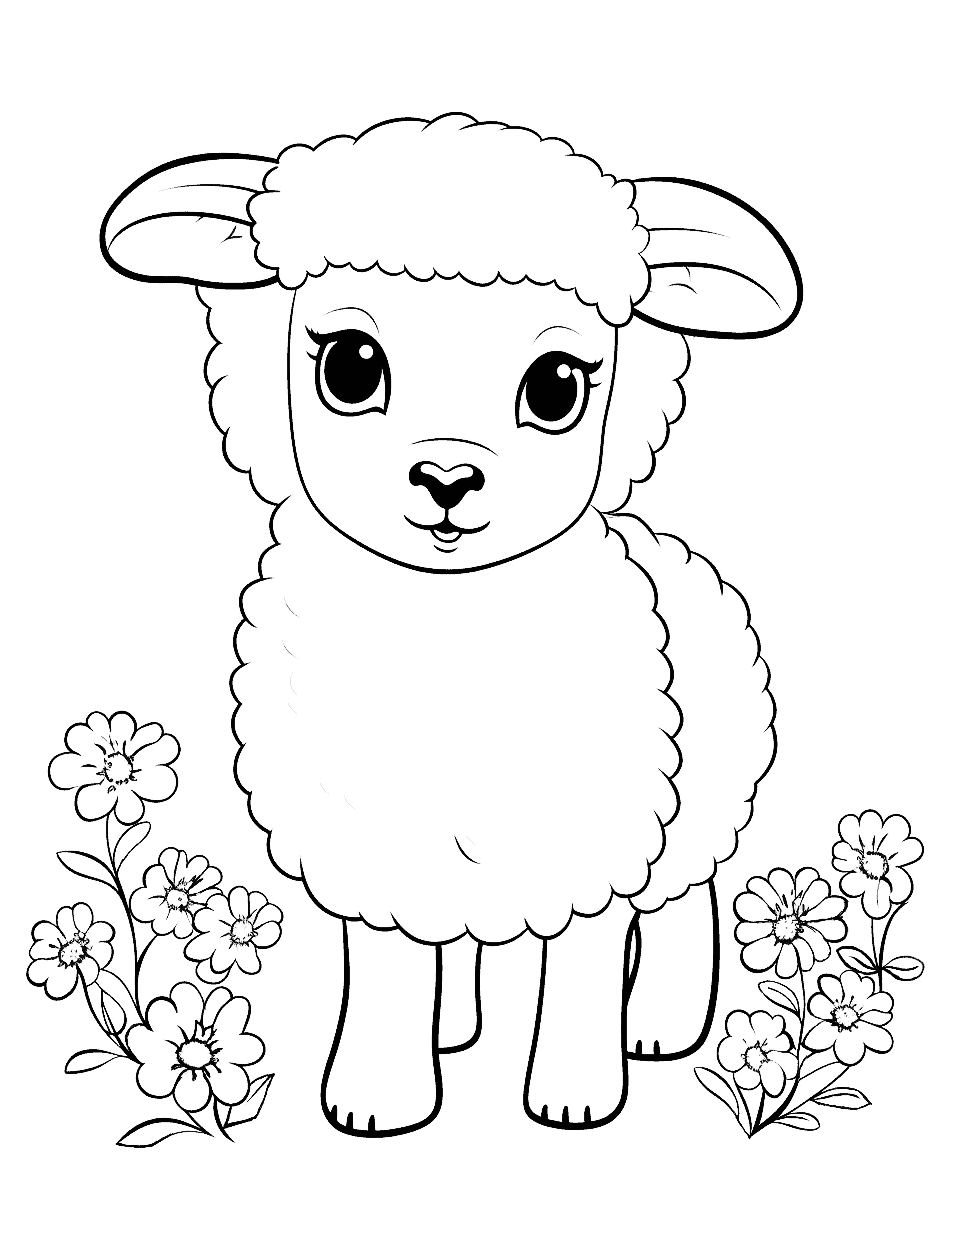 Cute Lamb Animal Coloring Page - A fluffy lamb with a sweet expression, surrounded by flowers.